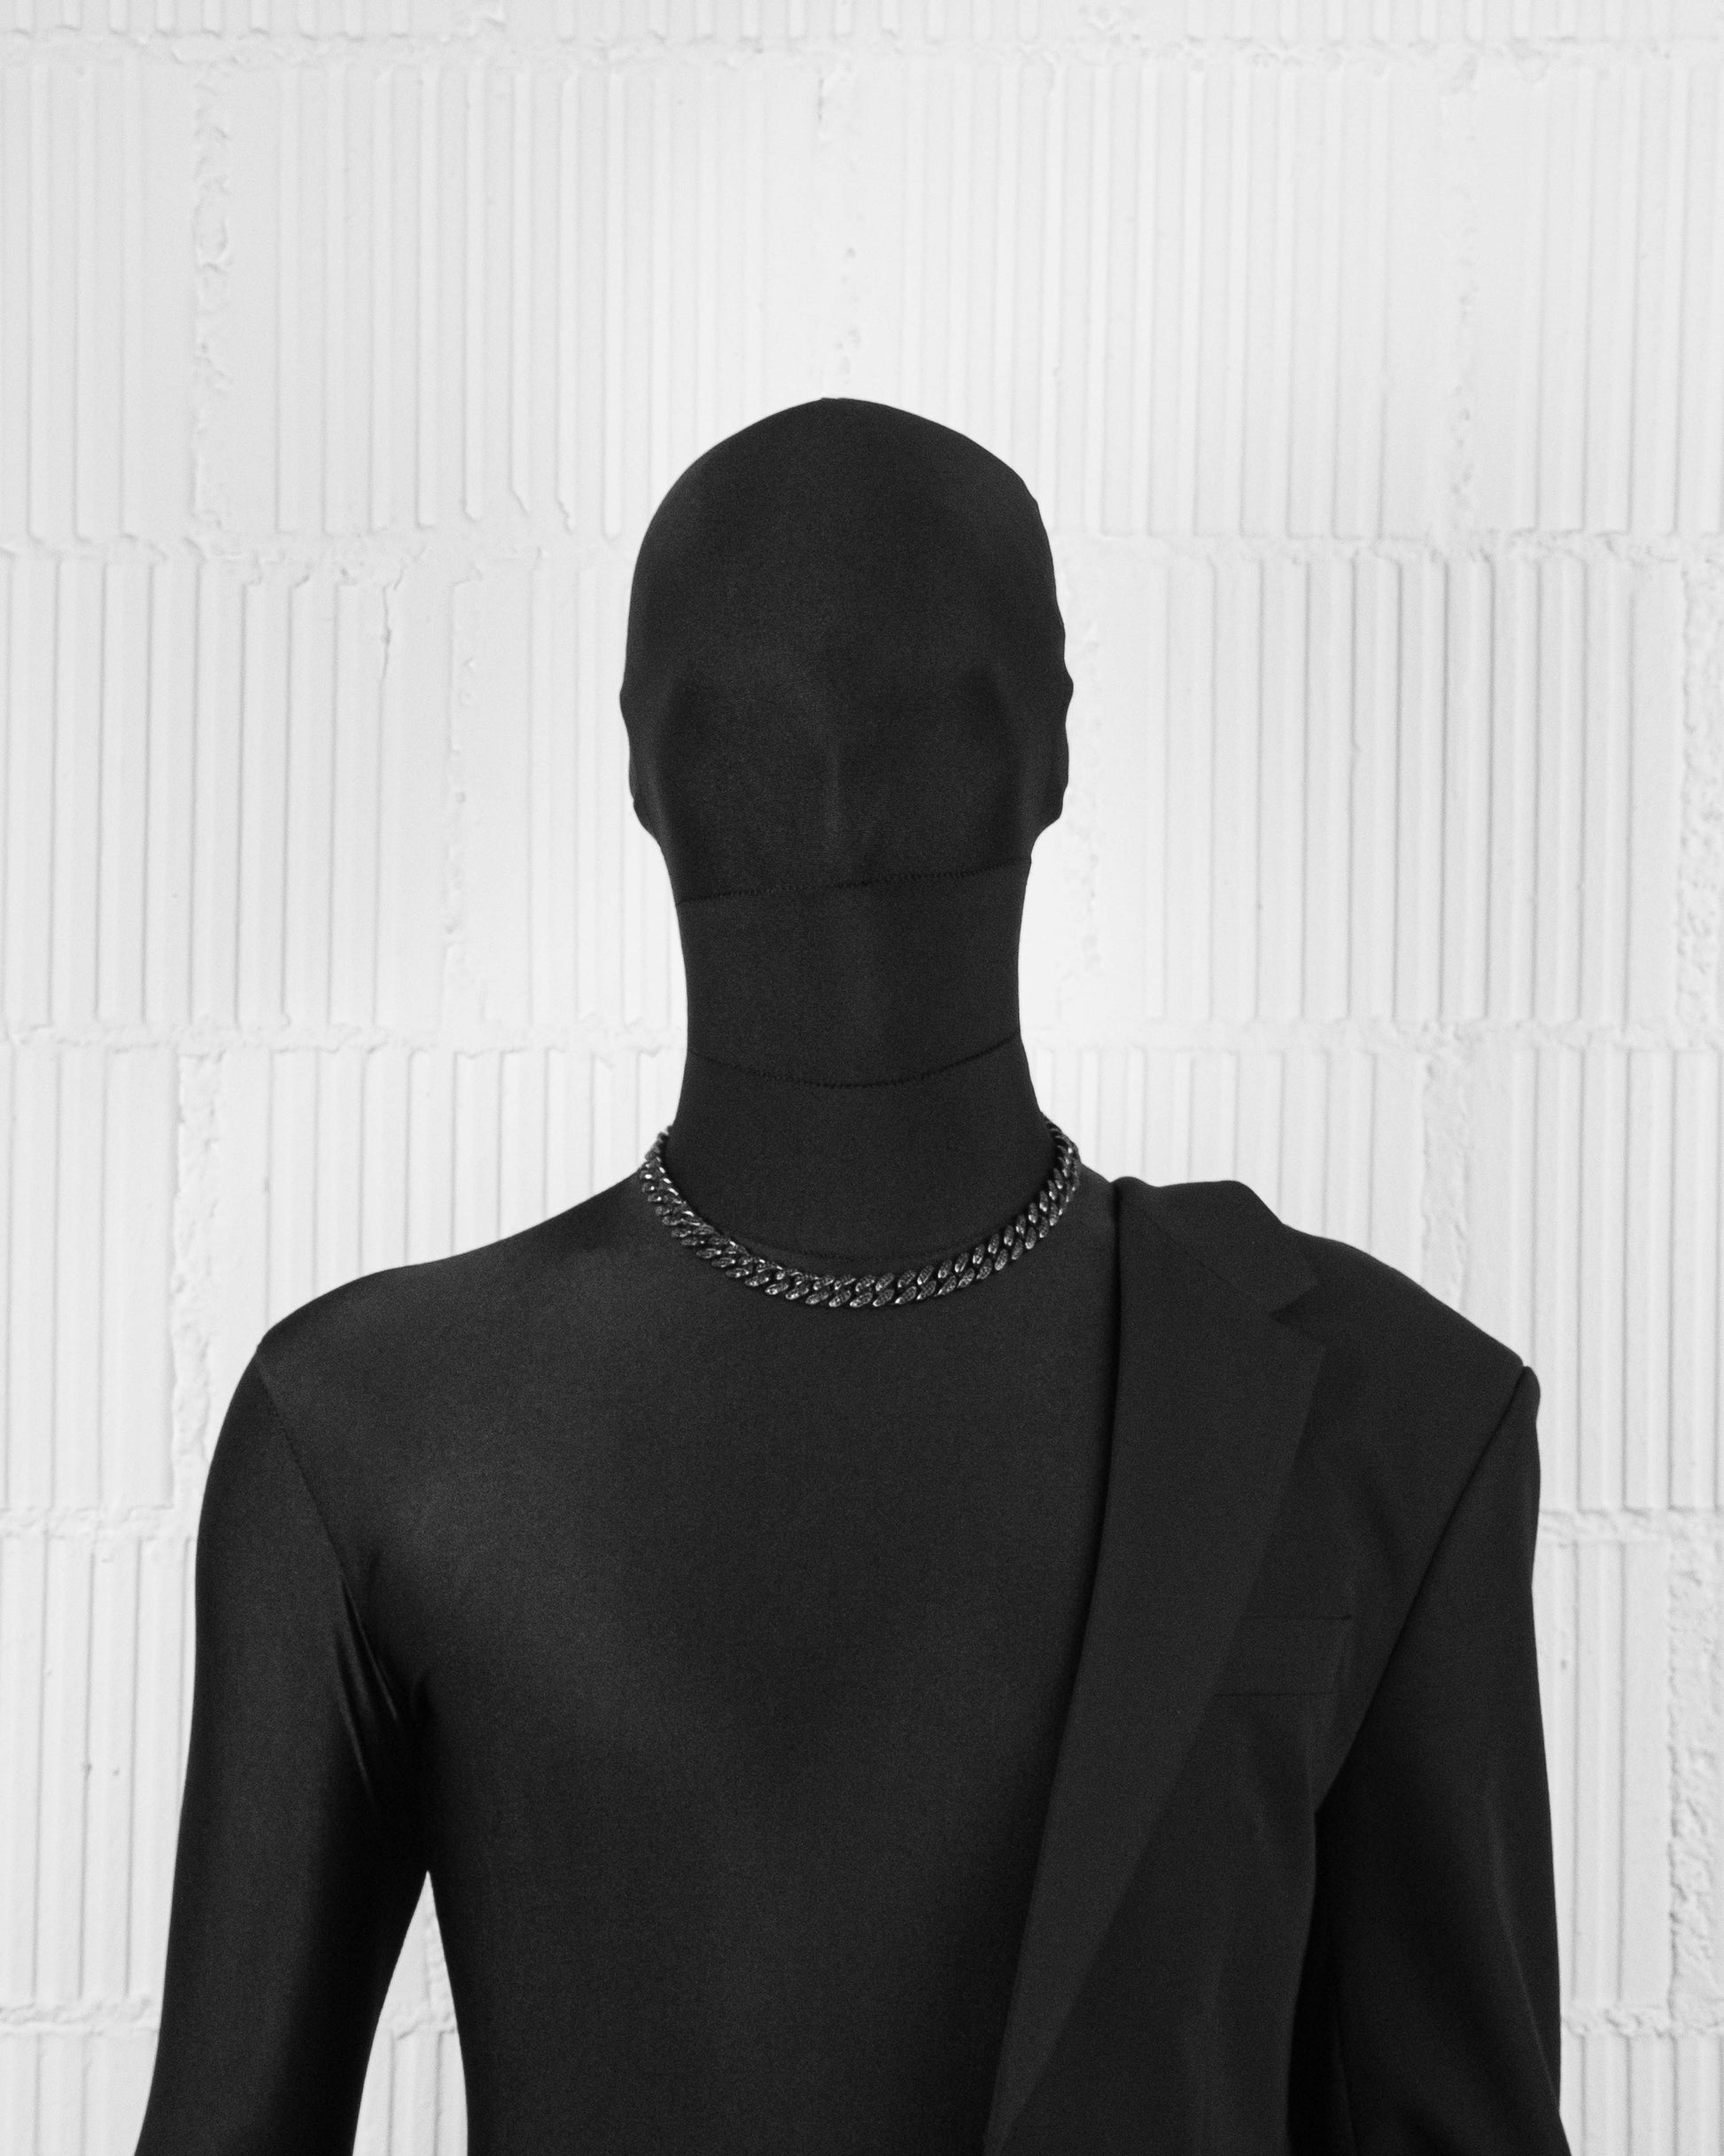 man with black suit wearing Black PVD coated cuban chain necklace with hand-set micropavé stones in black